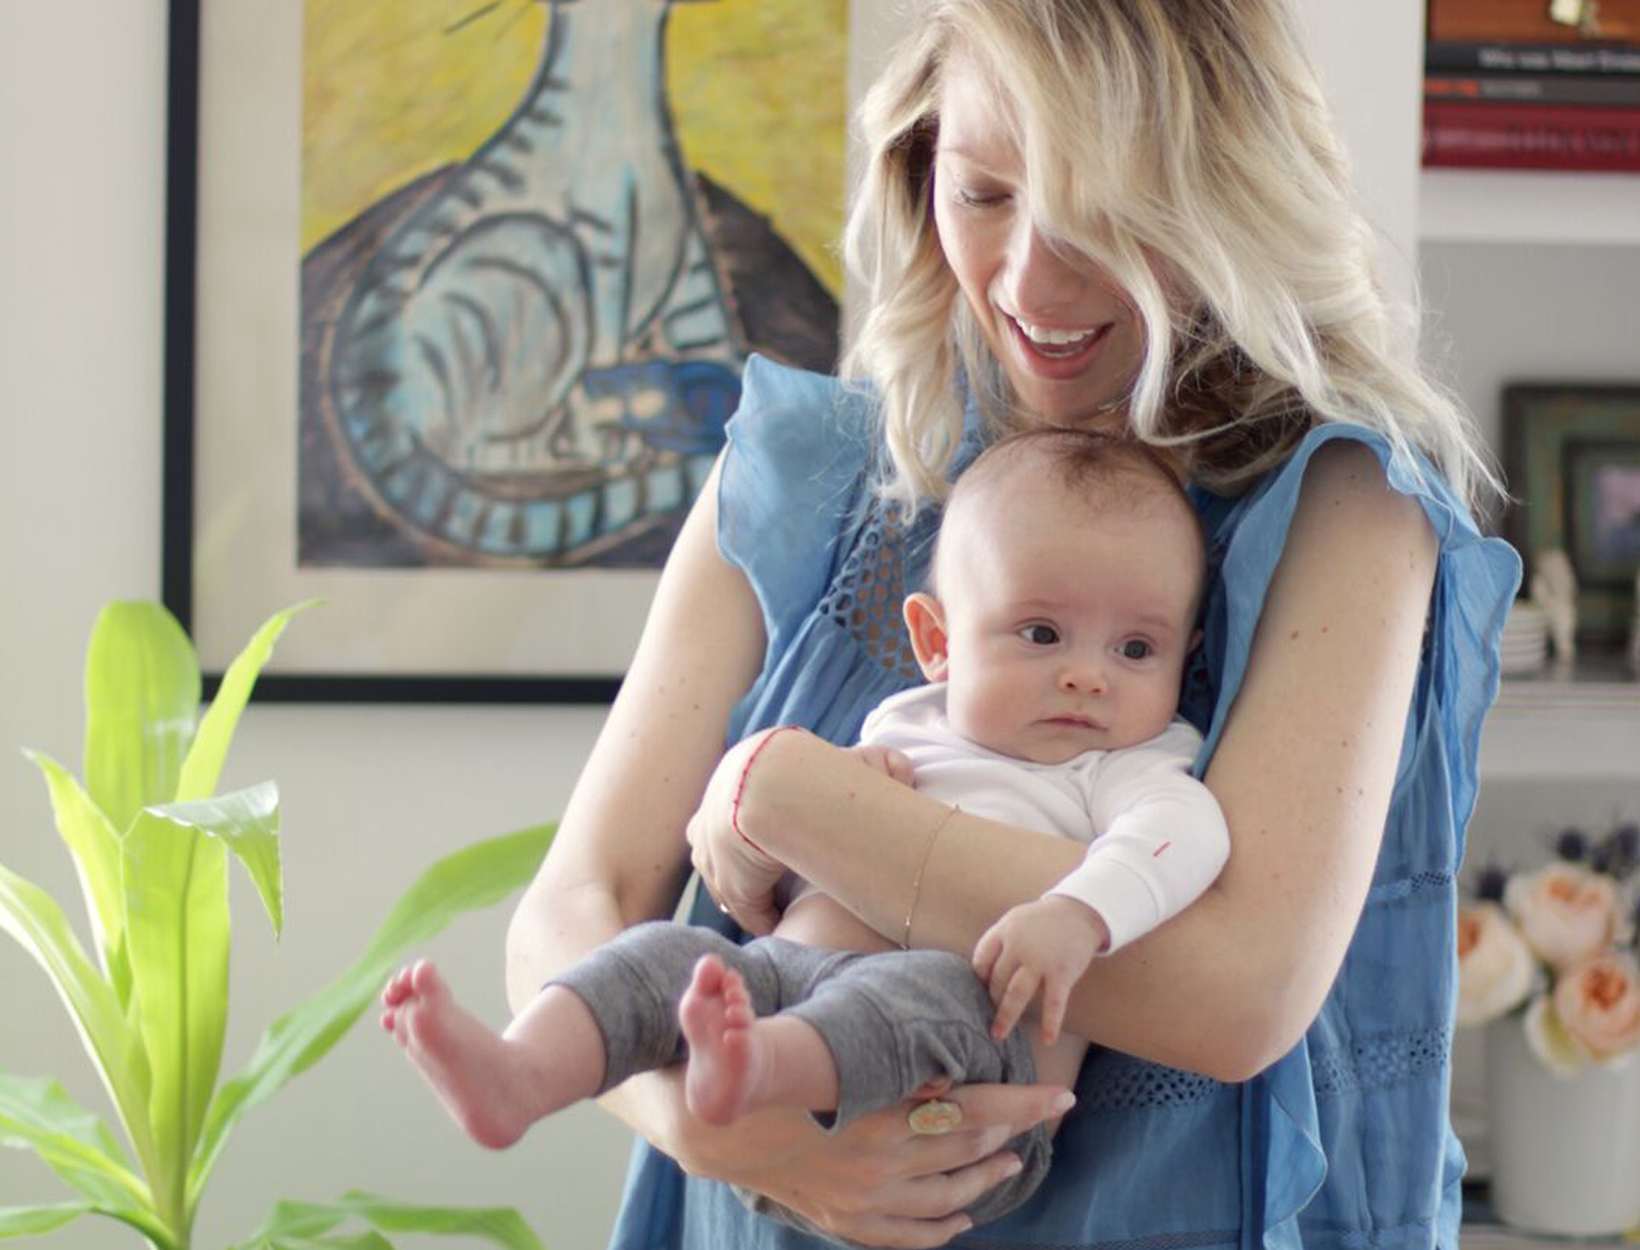 The New Mom/Working Mom Balancing Act